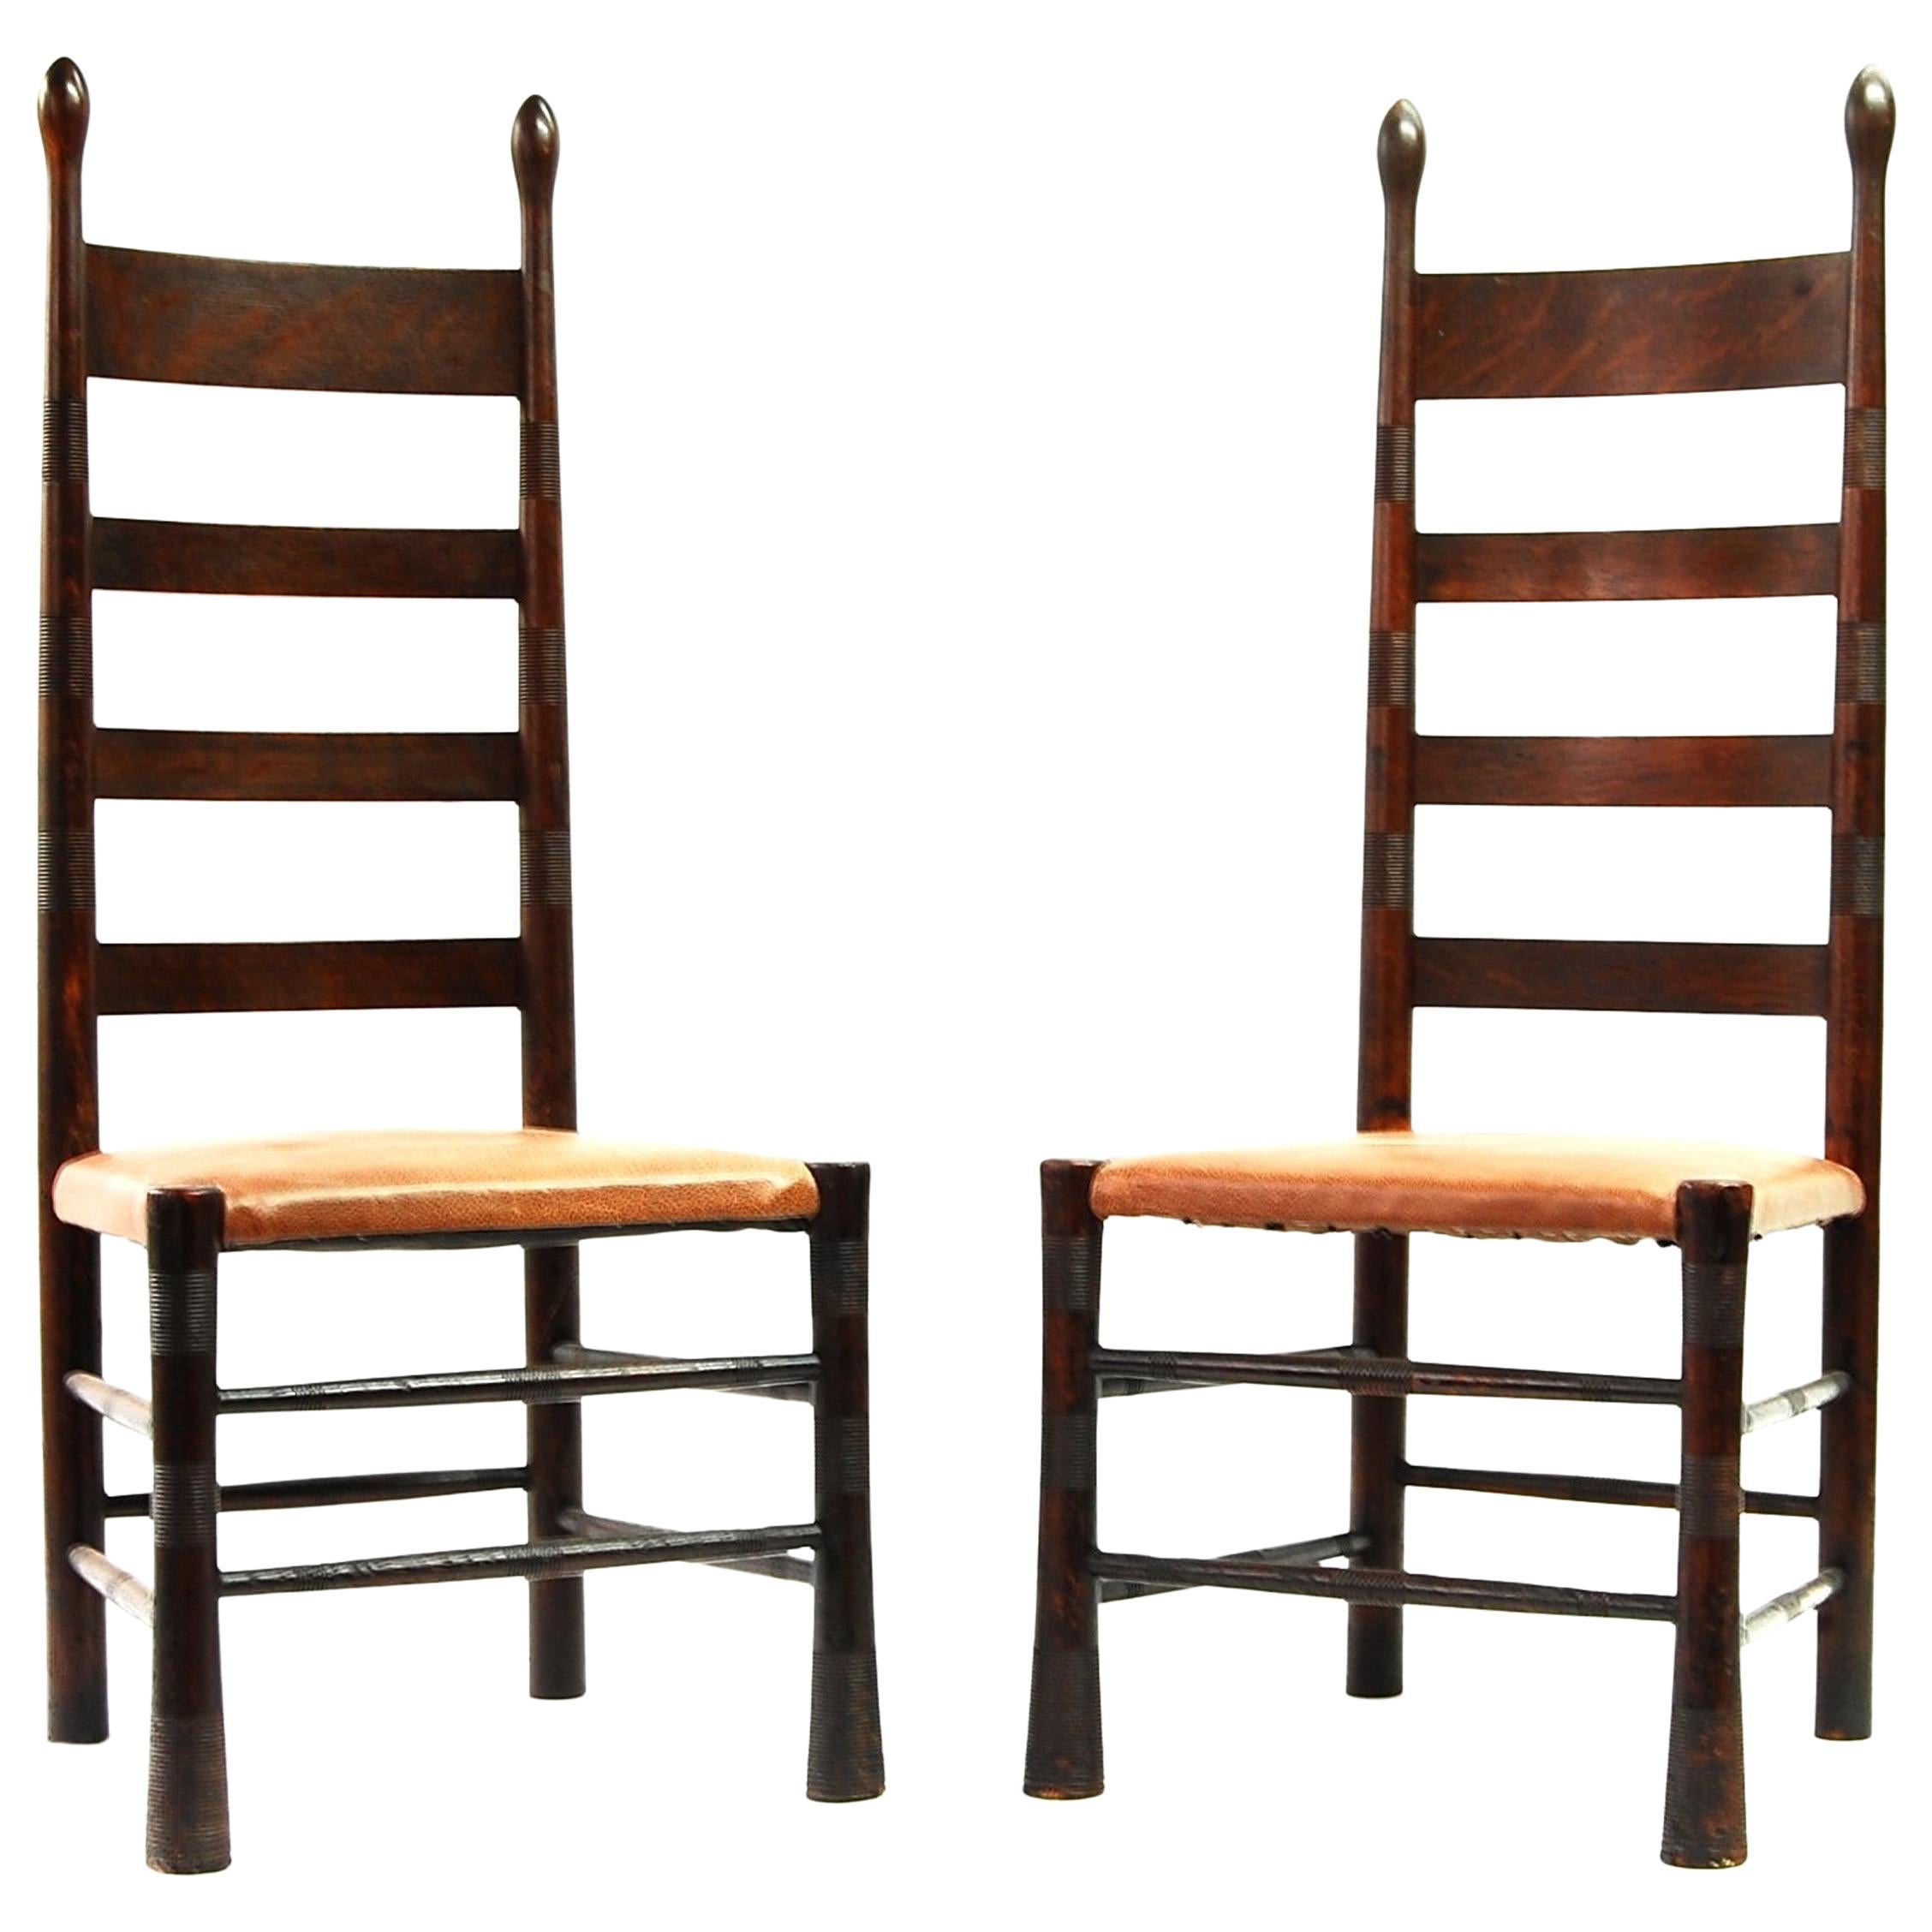 Pair of Aesthetic Movement Chairs Attributed to E.G. Punnet & William Birch